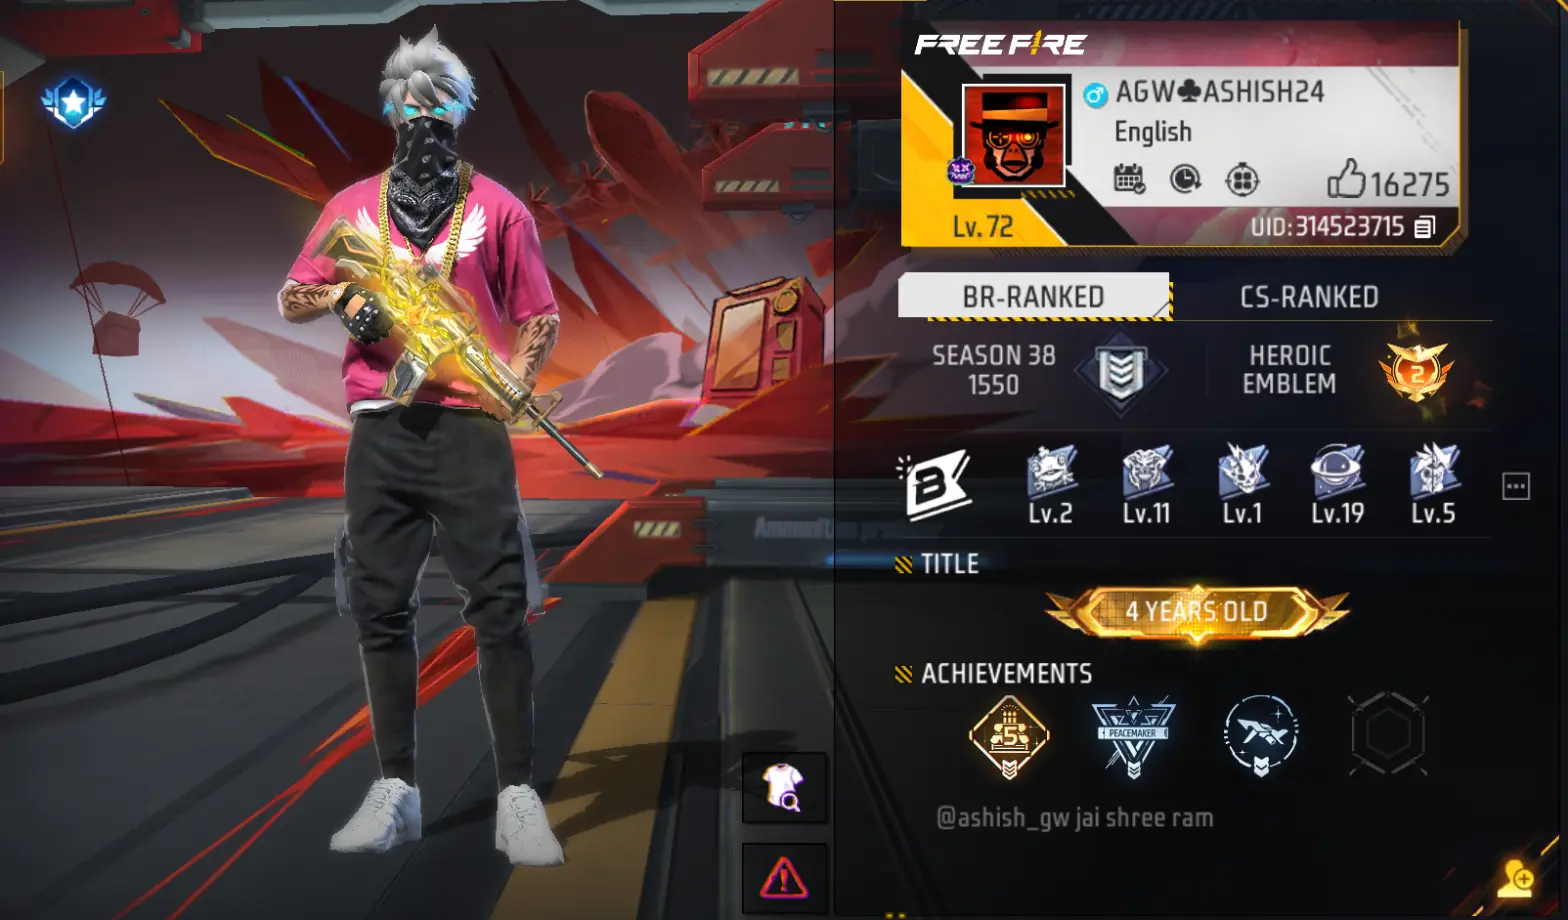 Free Fire uid profile screenshot of Ashish Gamer world, a character wearing stylish clothes standing with a gun.